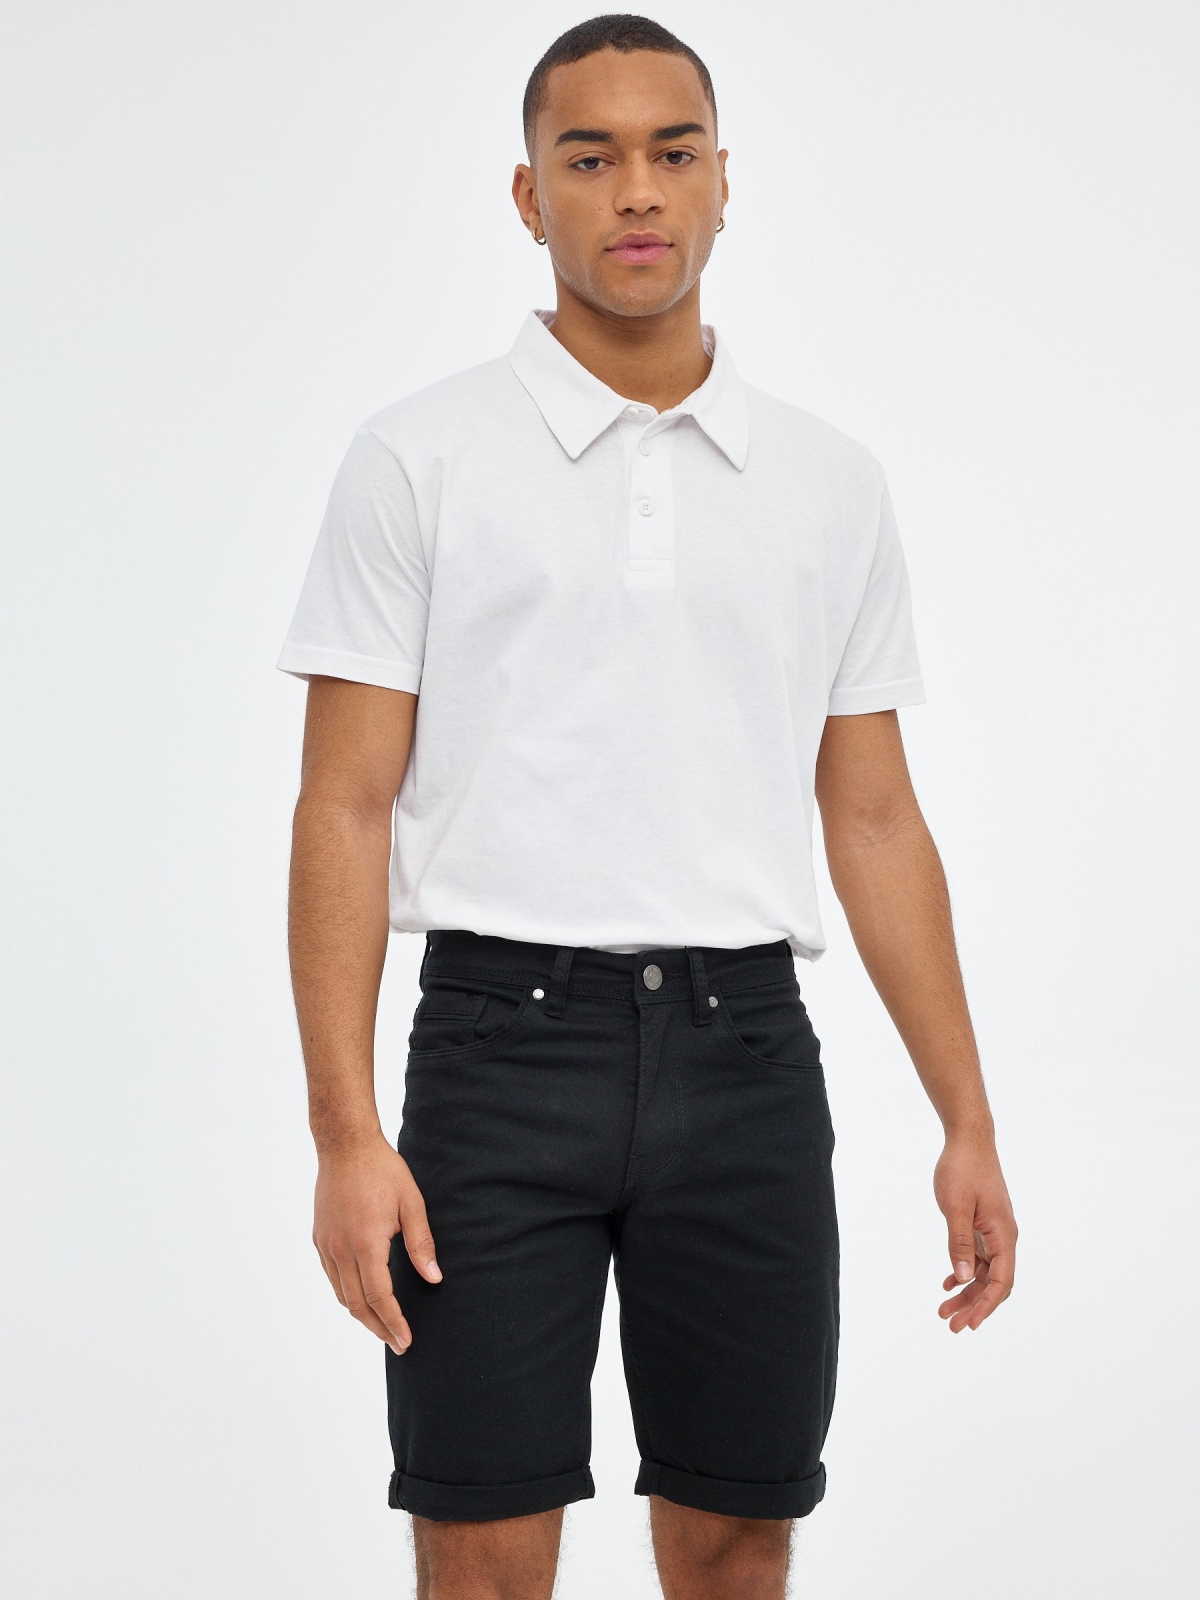 Bermuda short with five pockets black middle front view